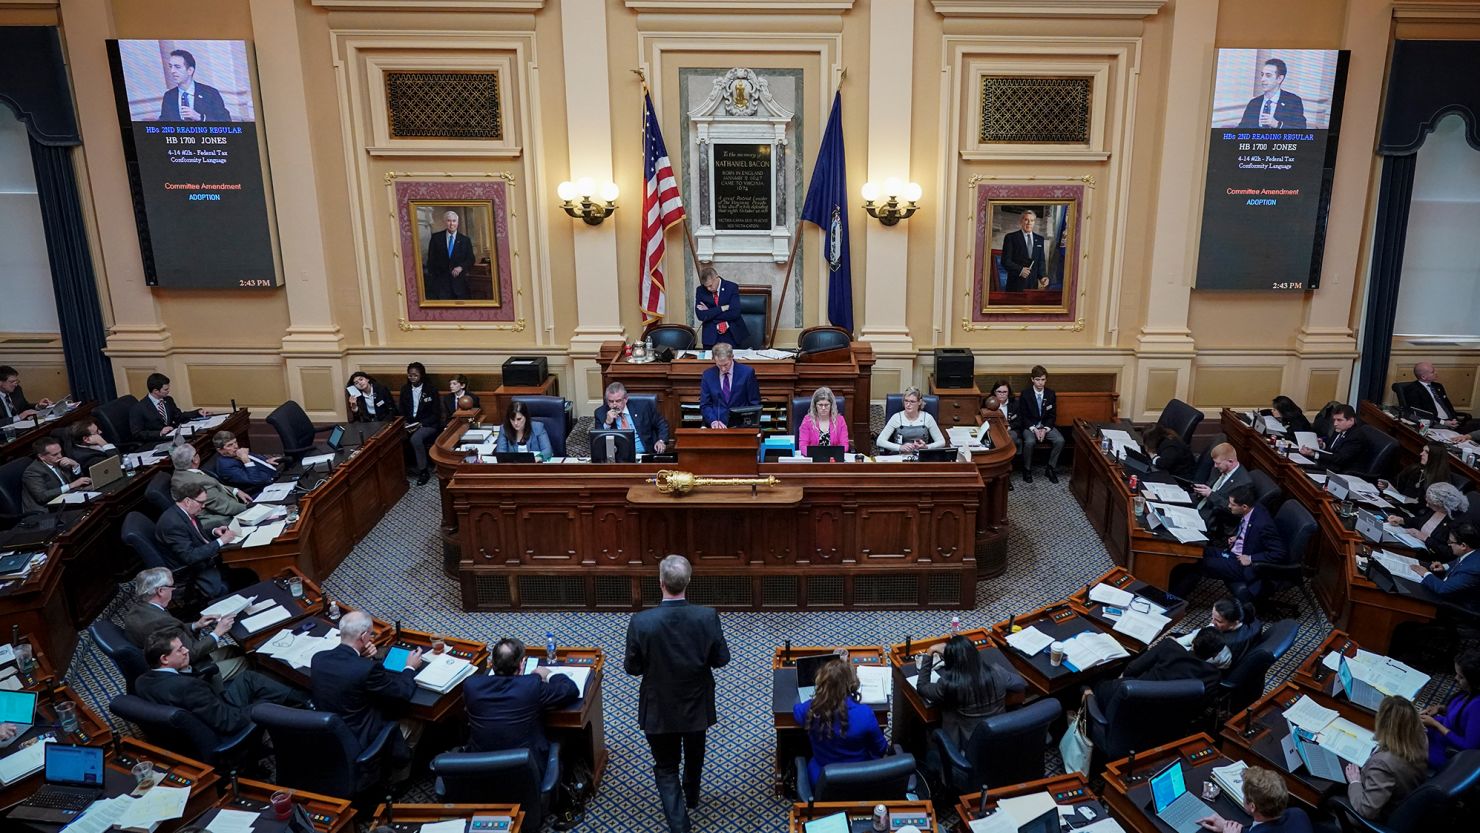 A view inside the House of Delegates chamber as Virginia Speaker of the House Kirk Cox presides over a session at the Virginia State Capitol, February 7, 2019, in Richmond, Virginia.